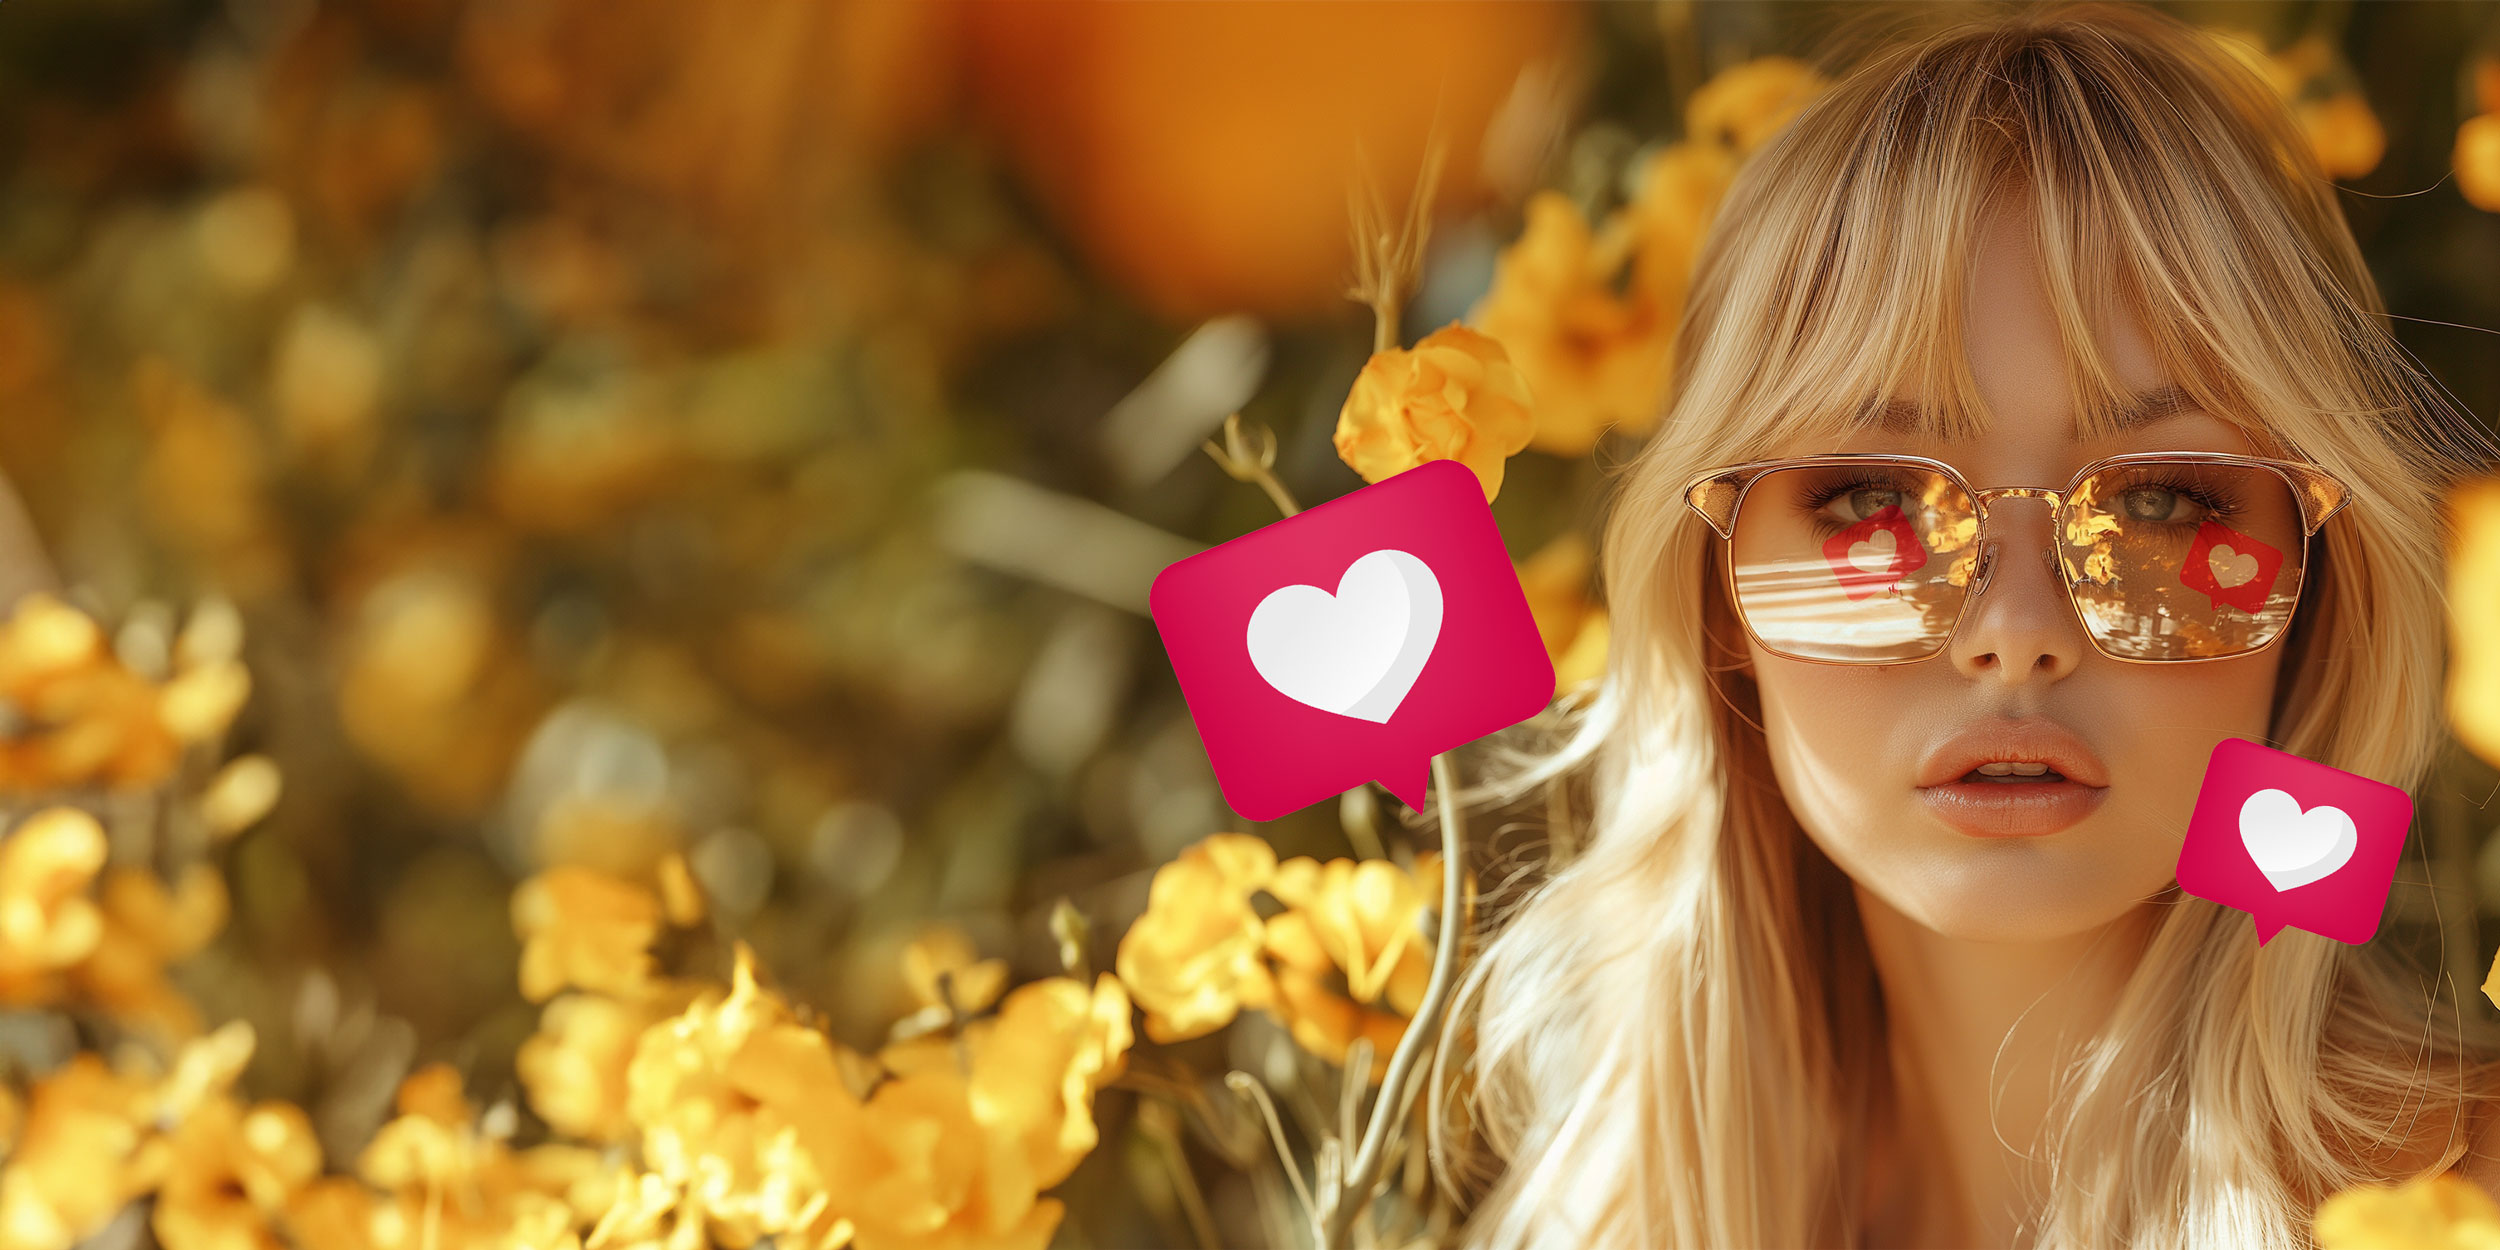 portrait of a blonde woman wearing reflective shades in a field of golden flowers